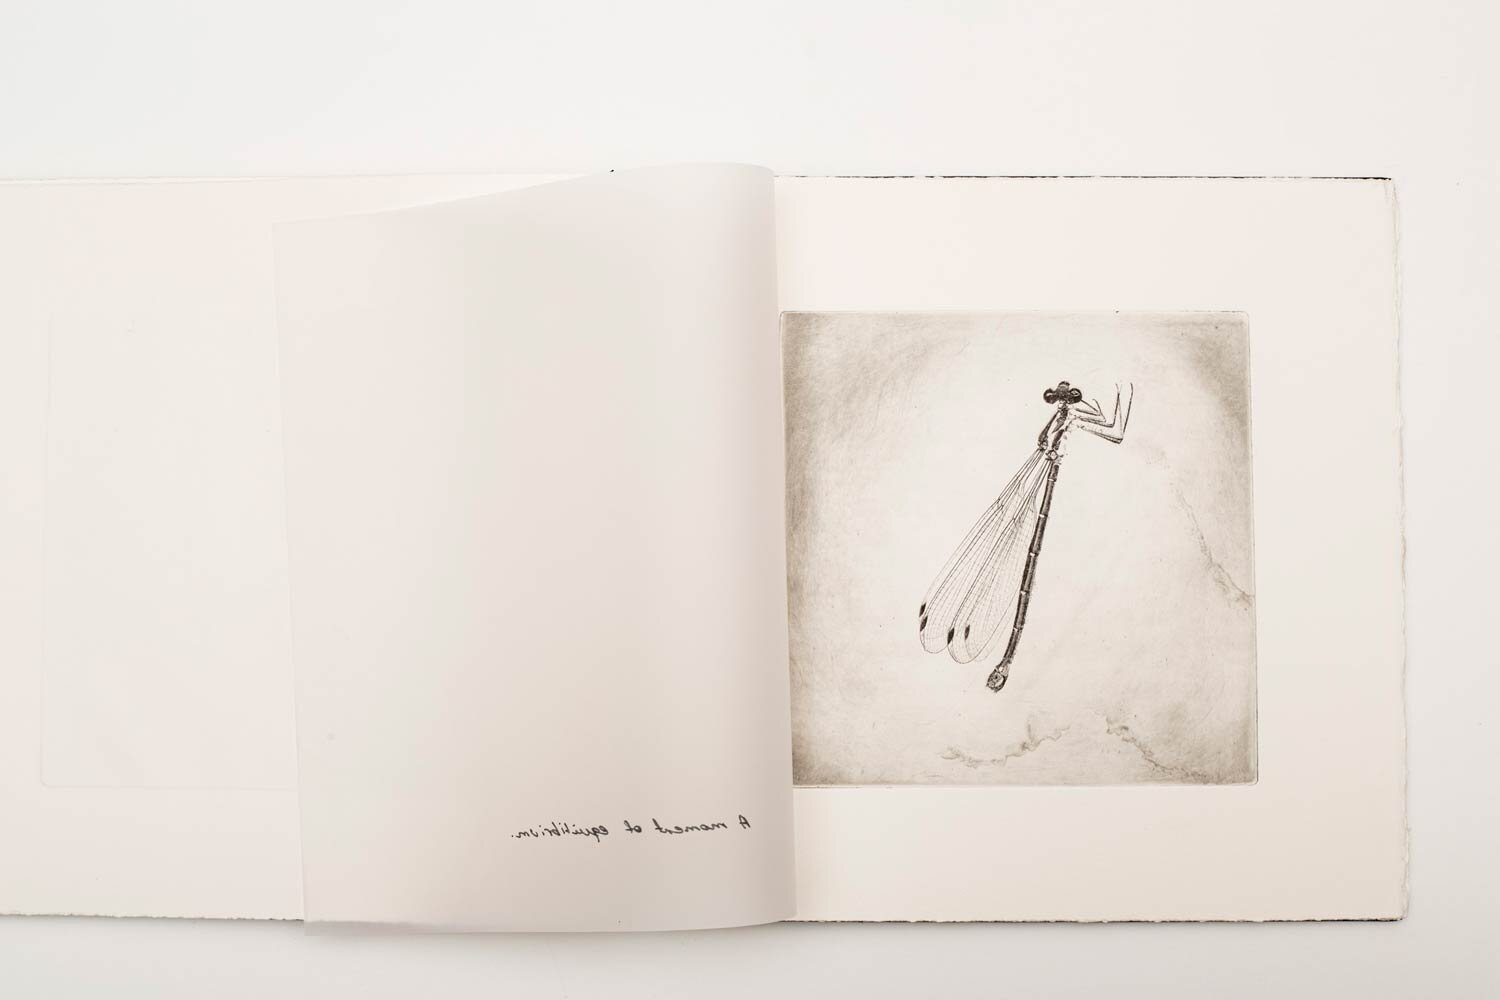 'Studio-Collection'-Artist-Book-29-x-29-x-20-cm.-Edition-of-3-with-one-artist-proof-6.jpg